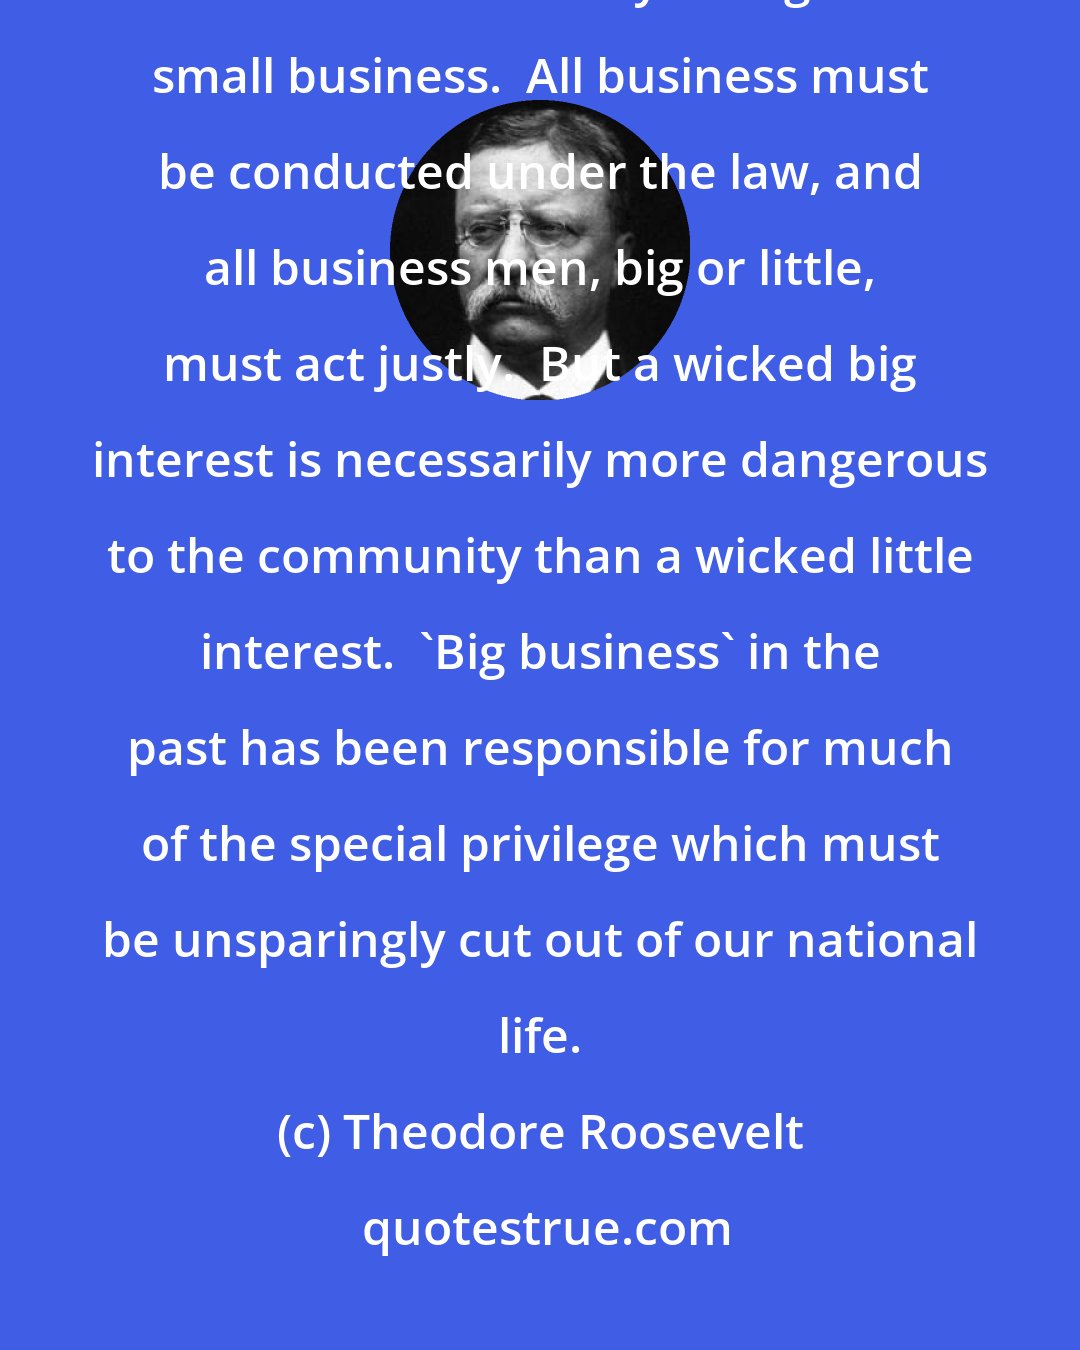 Theodore Roosevelt: It is imperative to exercise over big business a control and supervision which is unnecessary as regards small business.  All business must be conducted under the law, and all business men, big or little, must act justly.  But a wicked big interest is necessarily more dangerous to the community than a wicked little interest.  'Big business' in the past has been responsible for much of the special privilege which must be unsparingly cut out of our national life.